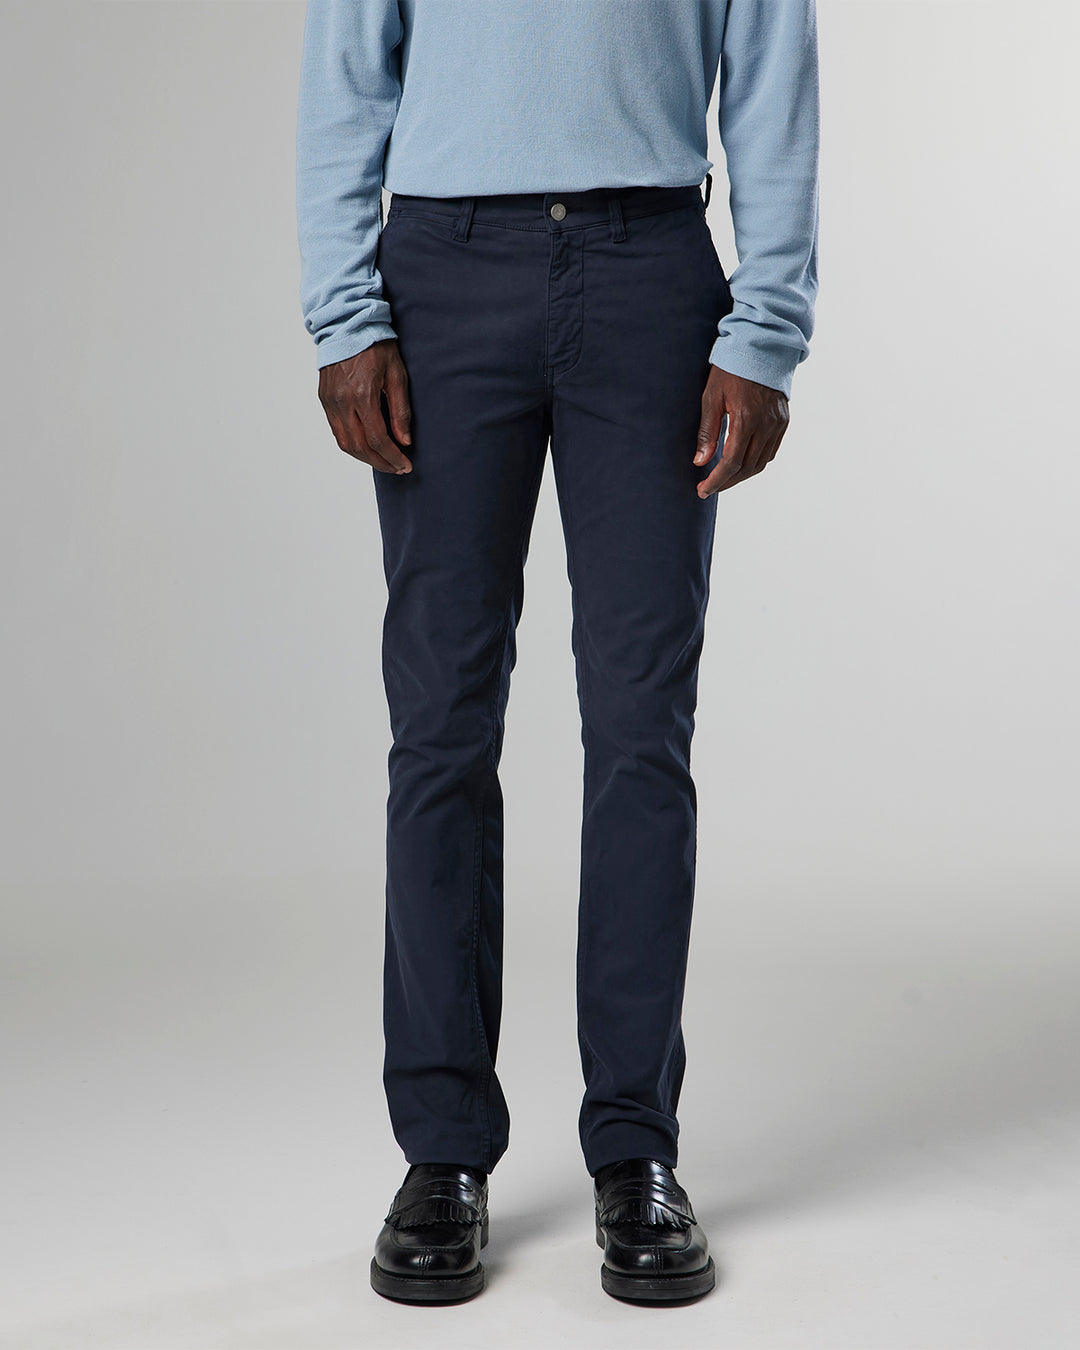 NN07 - Marco 1400 Classic Chino in Navy Blue | Buster McGee